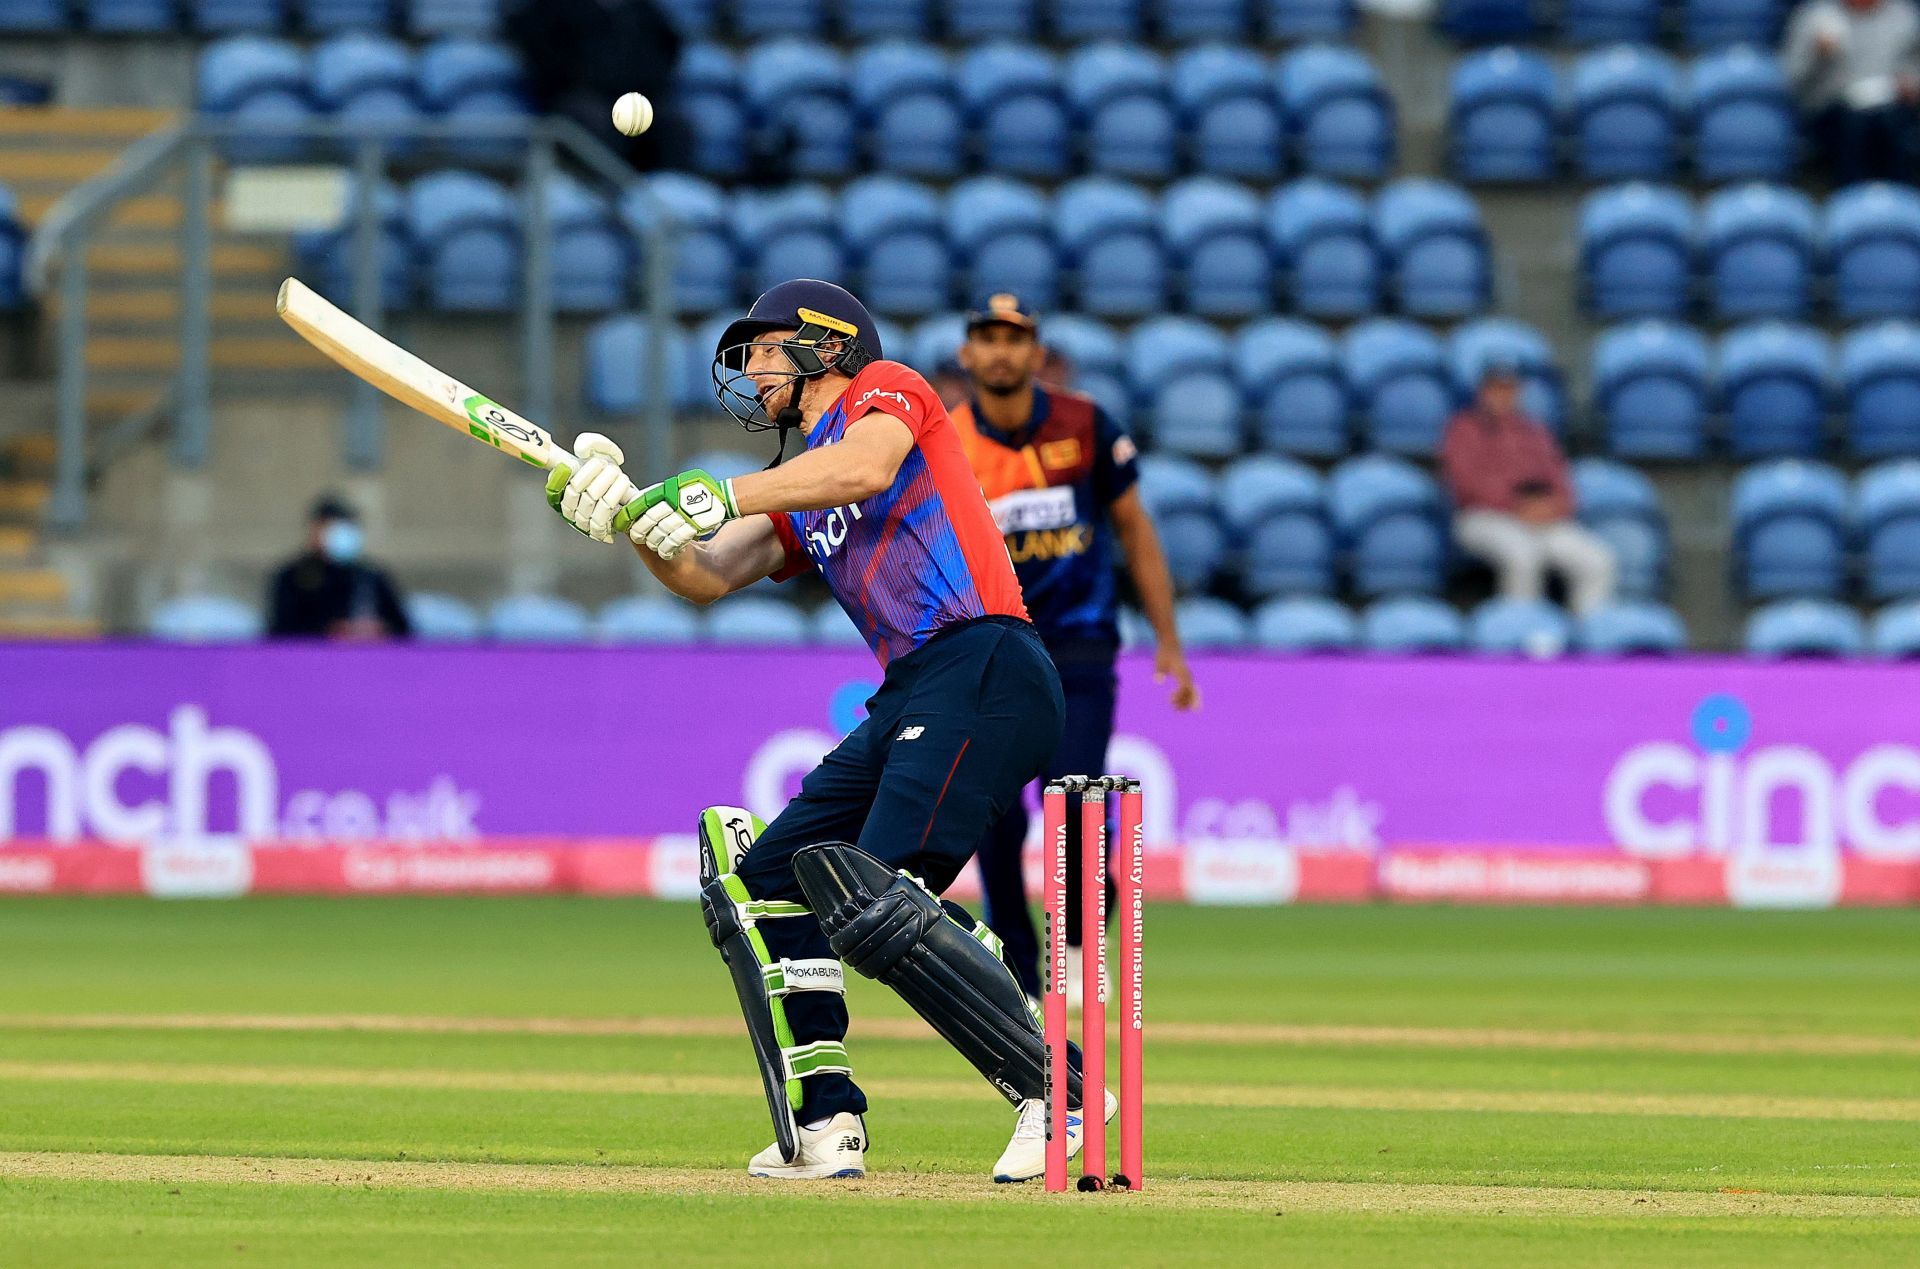 England will rely on Jos Buttler to give them flying starts at the top